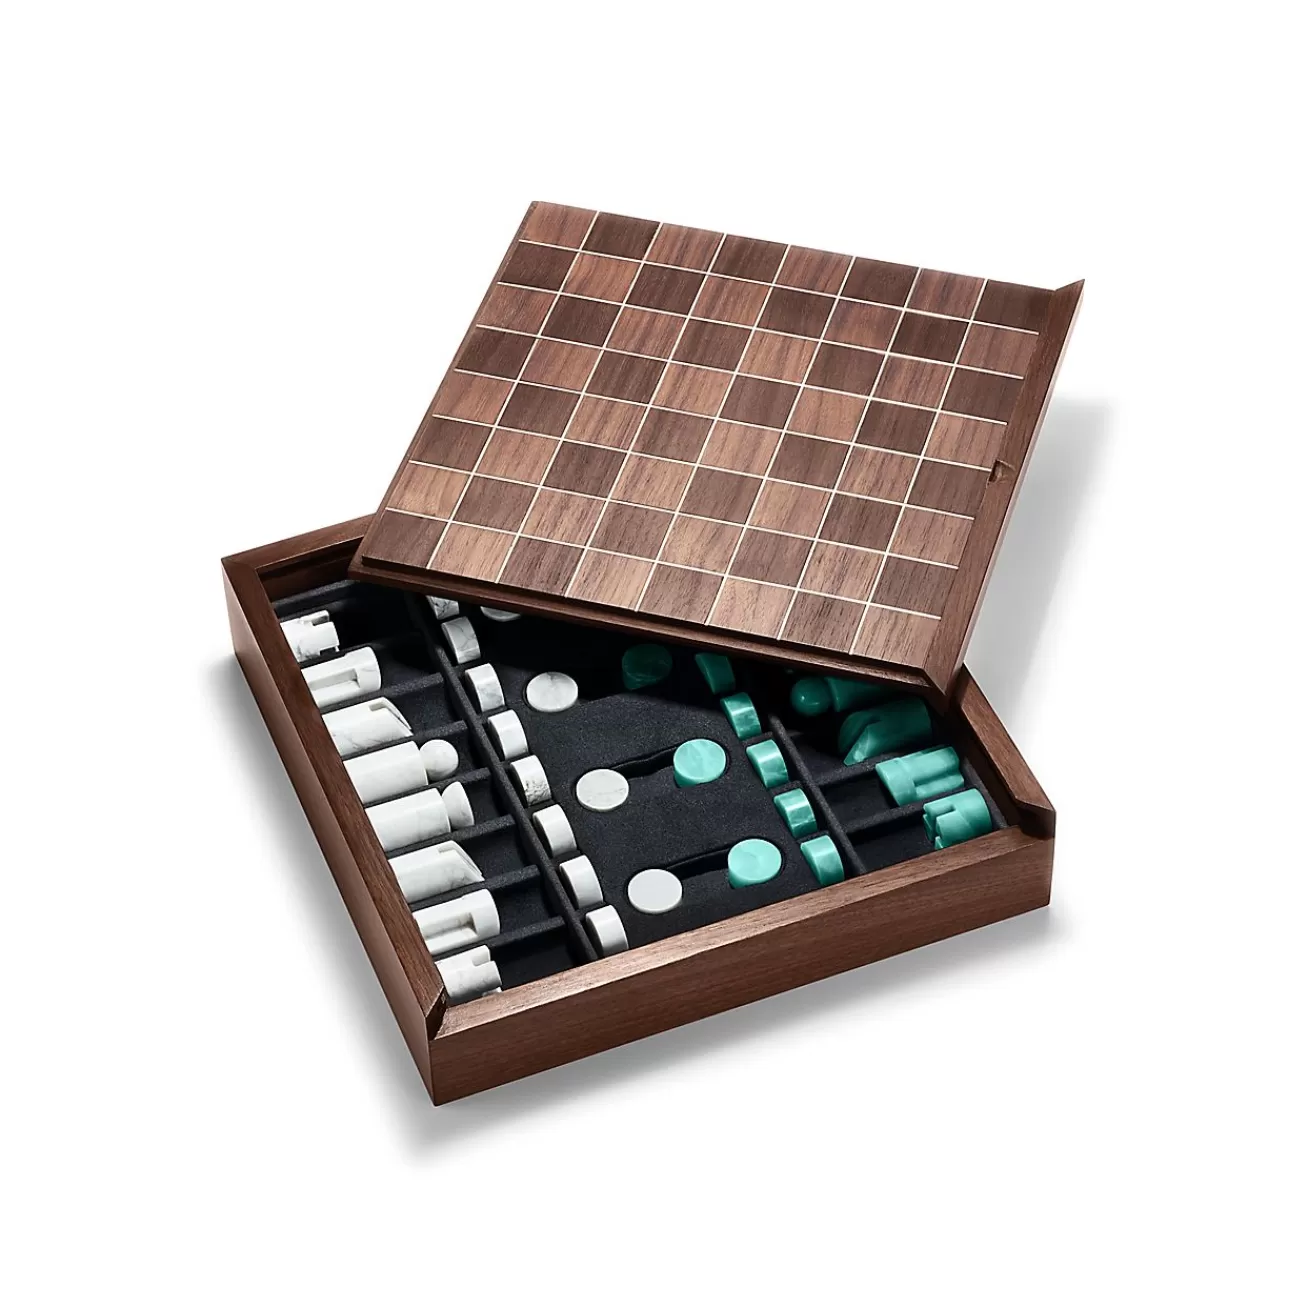 Tiffany & Co. Everyday Objects amazonite and wood chess and checkers set. | ^ Him | Gifts for Him